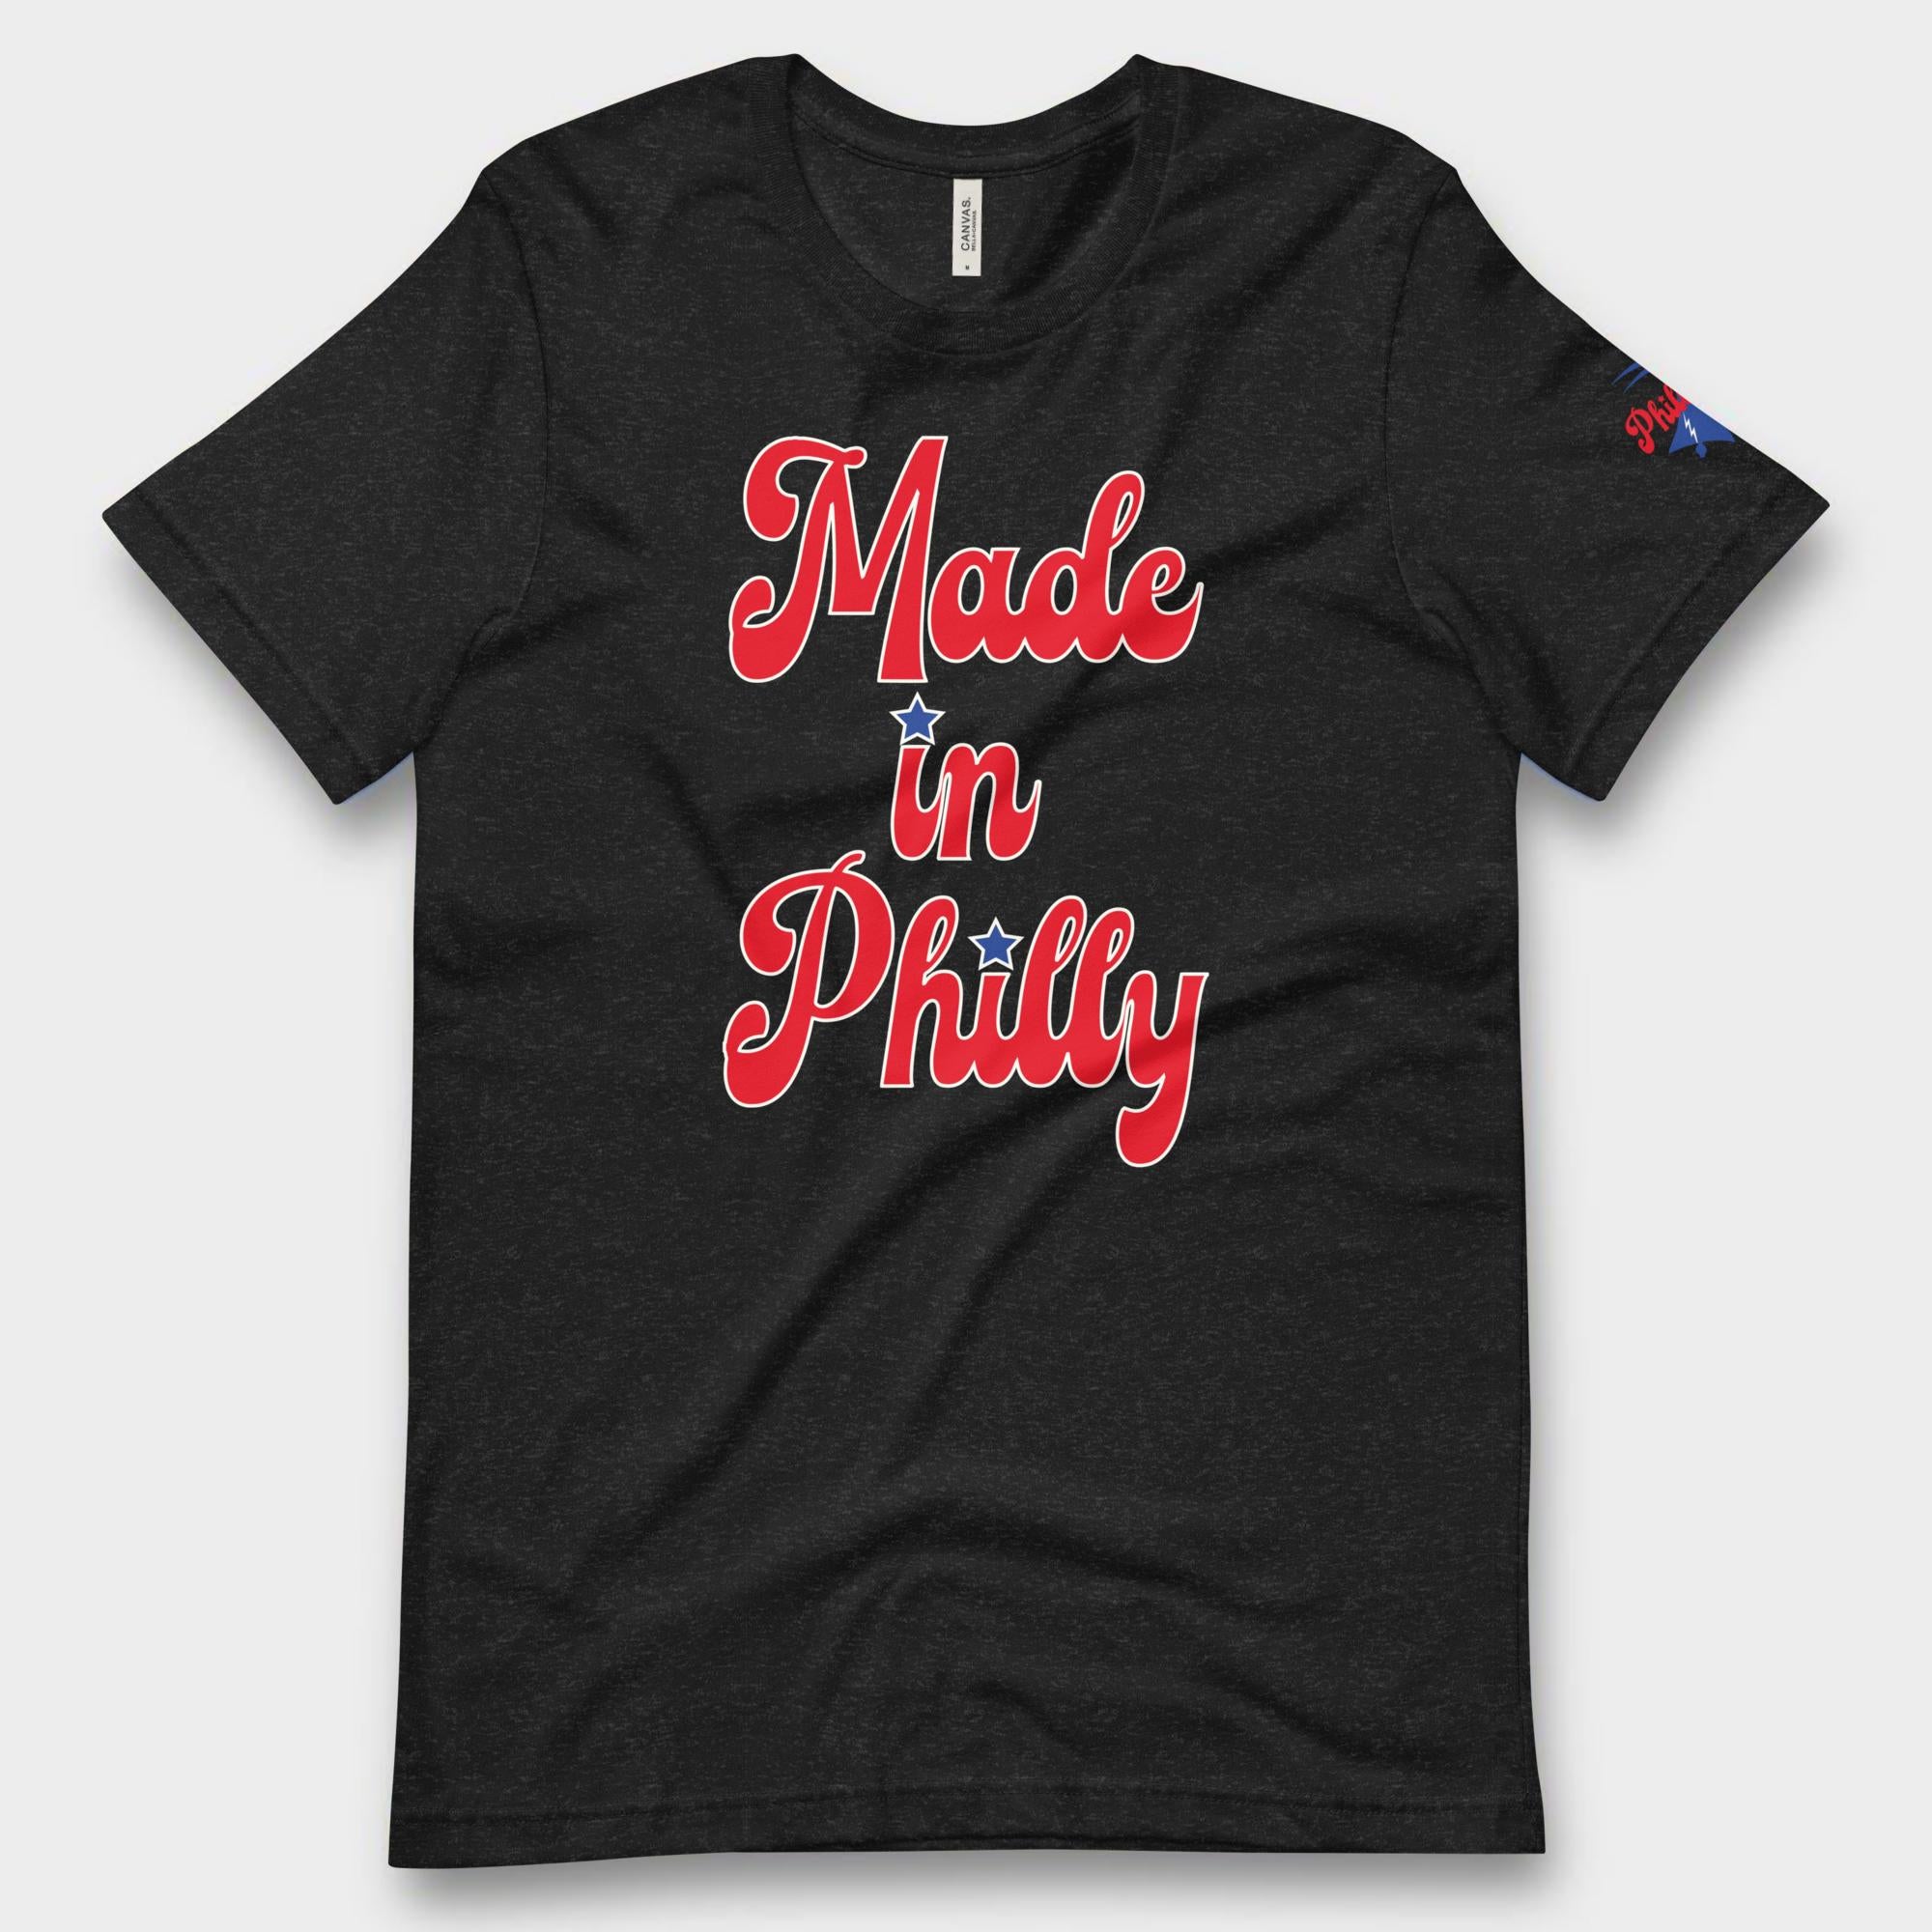 "Made in Philly" Tee